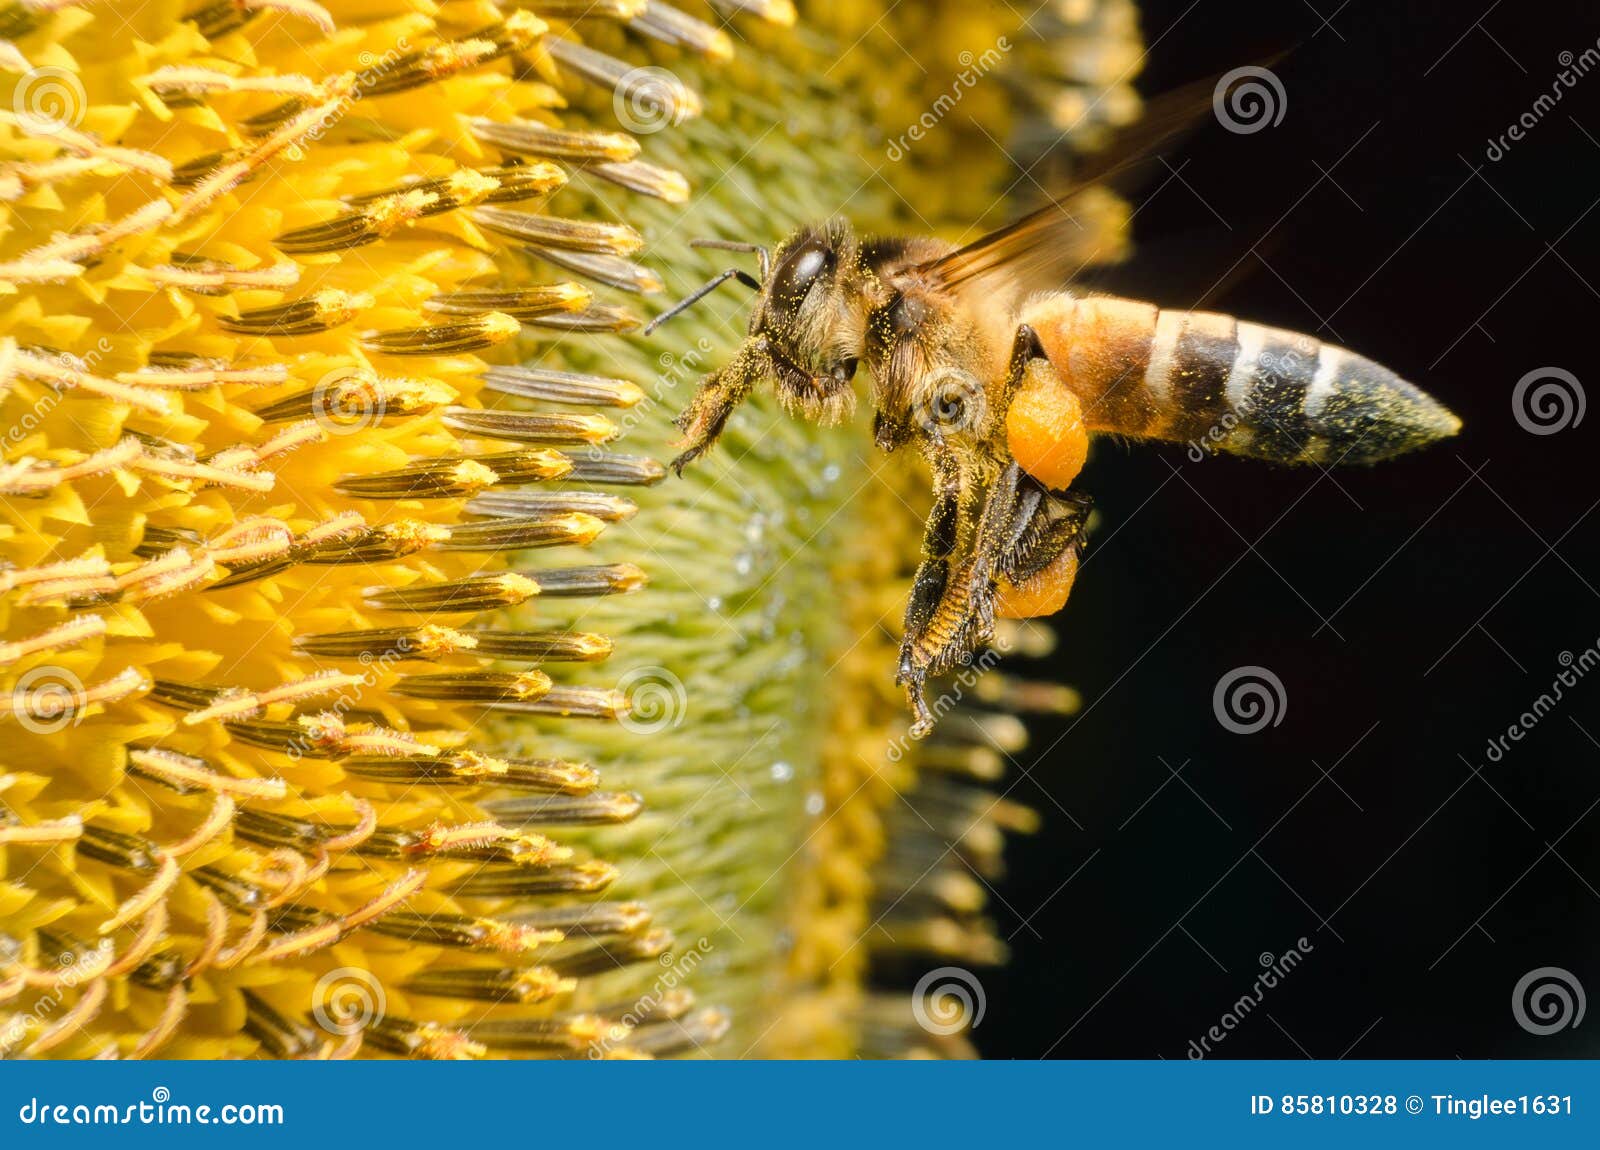 worker bee gathering nectar from sunflowers.